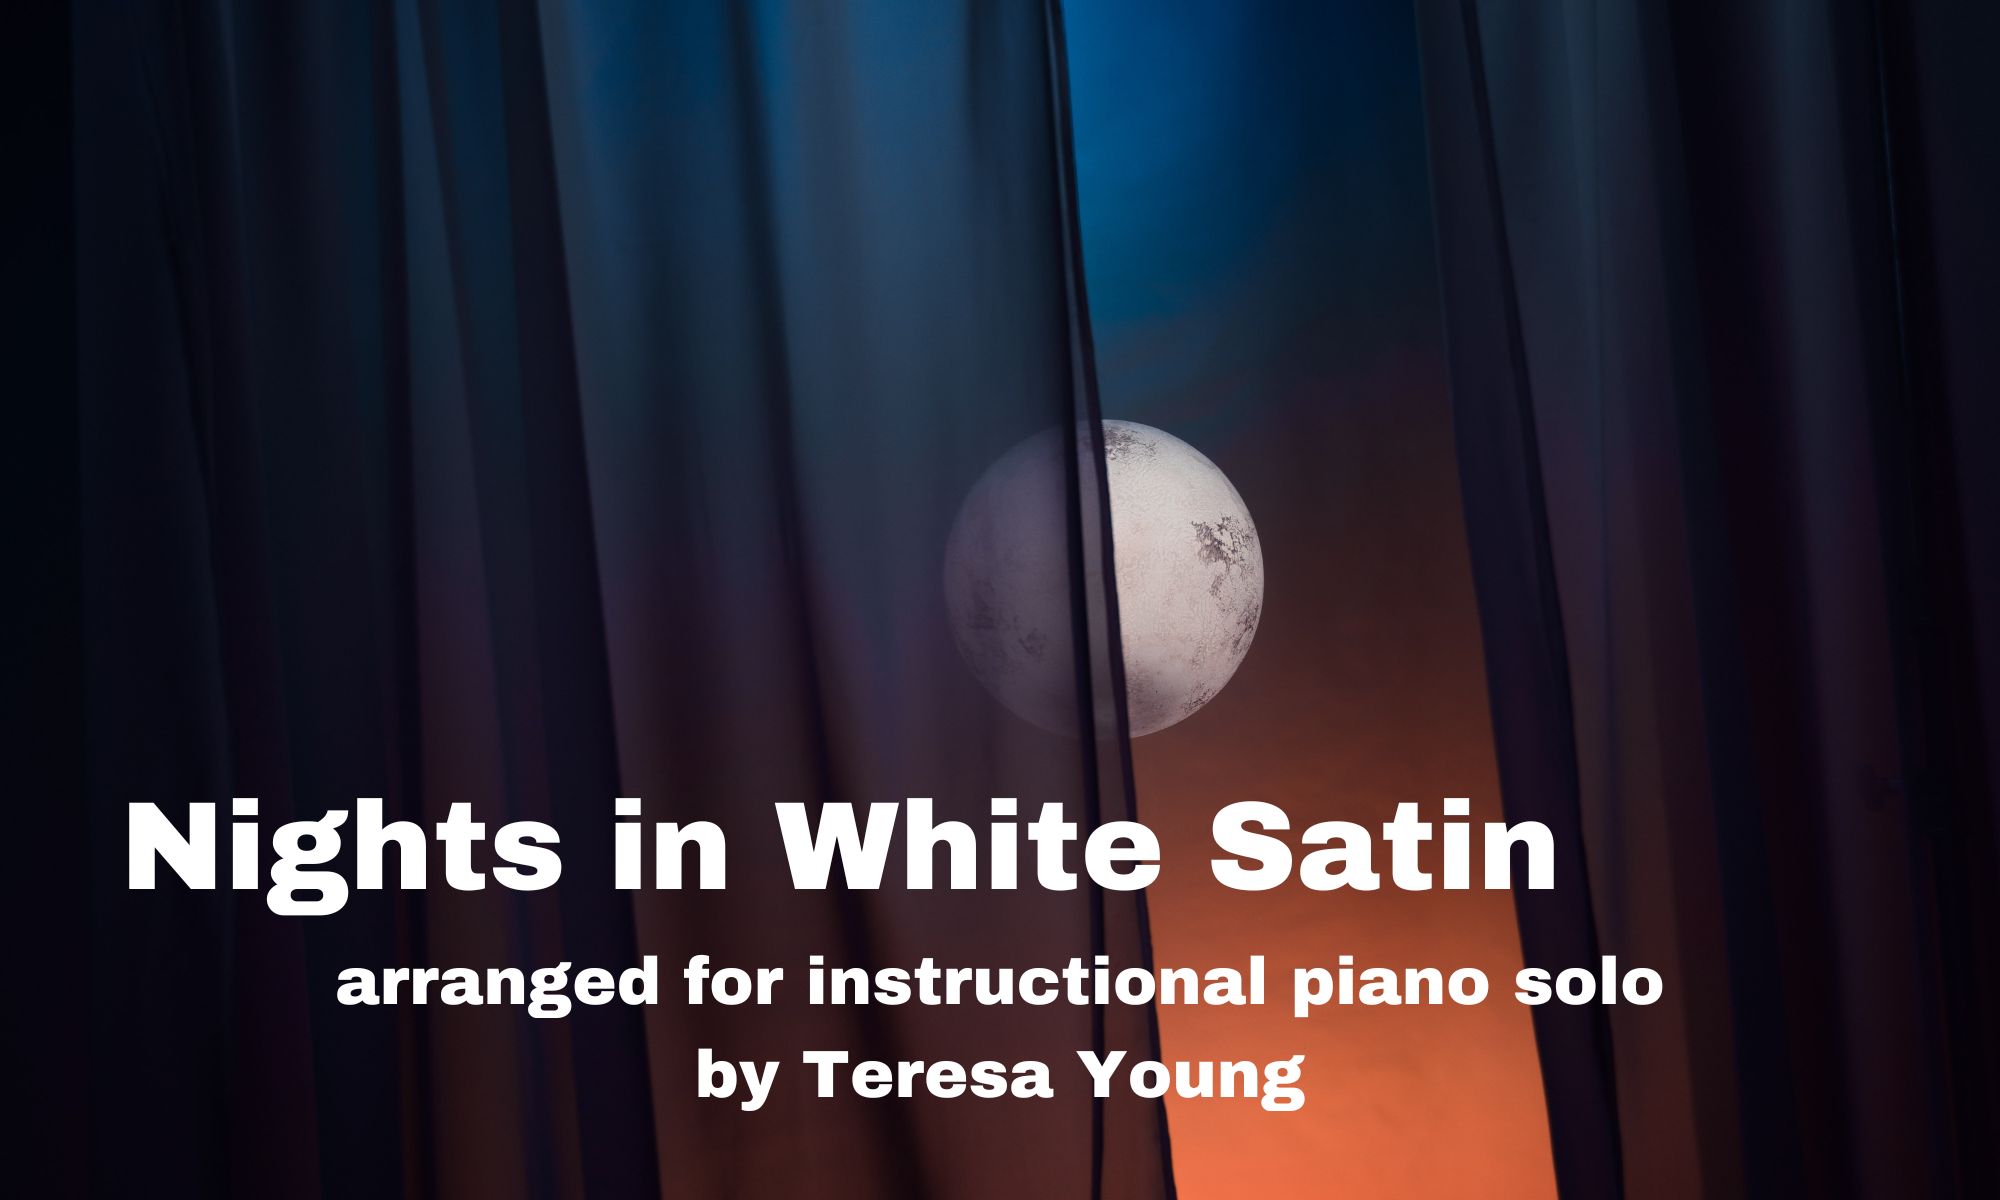 Nights in White Satin arr. Teresa Young